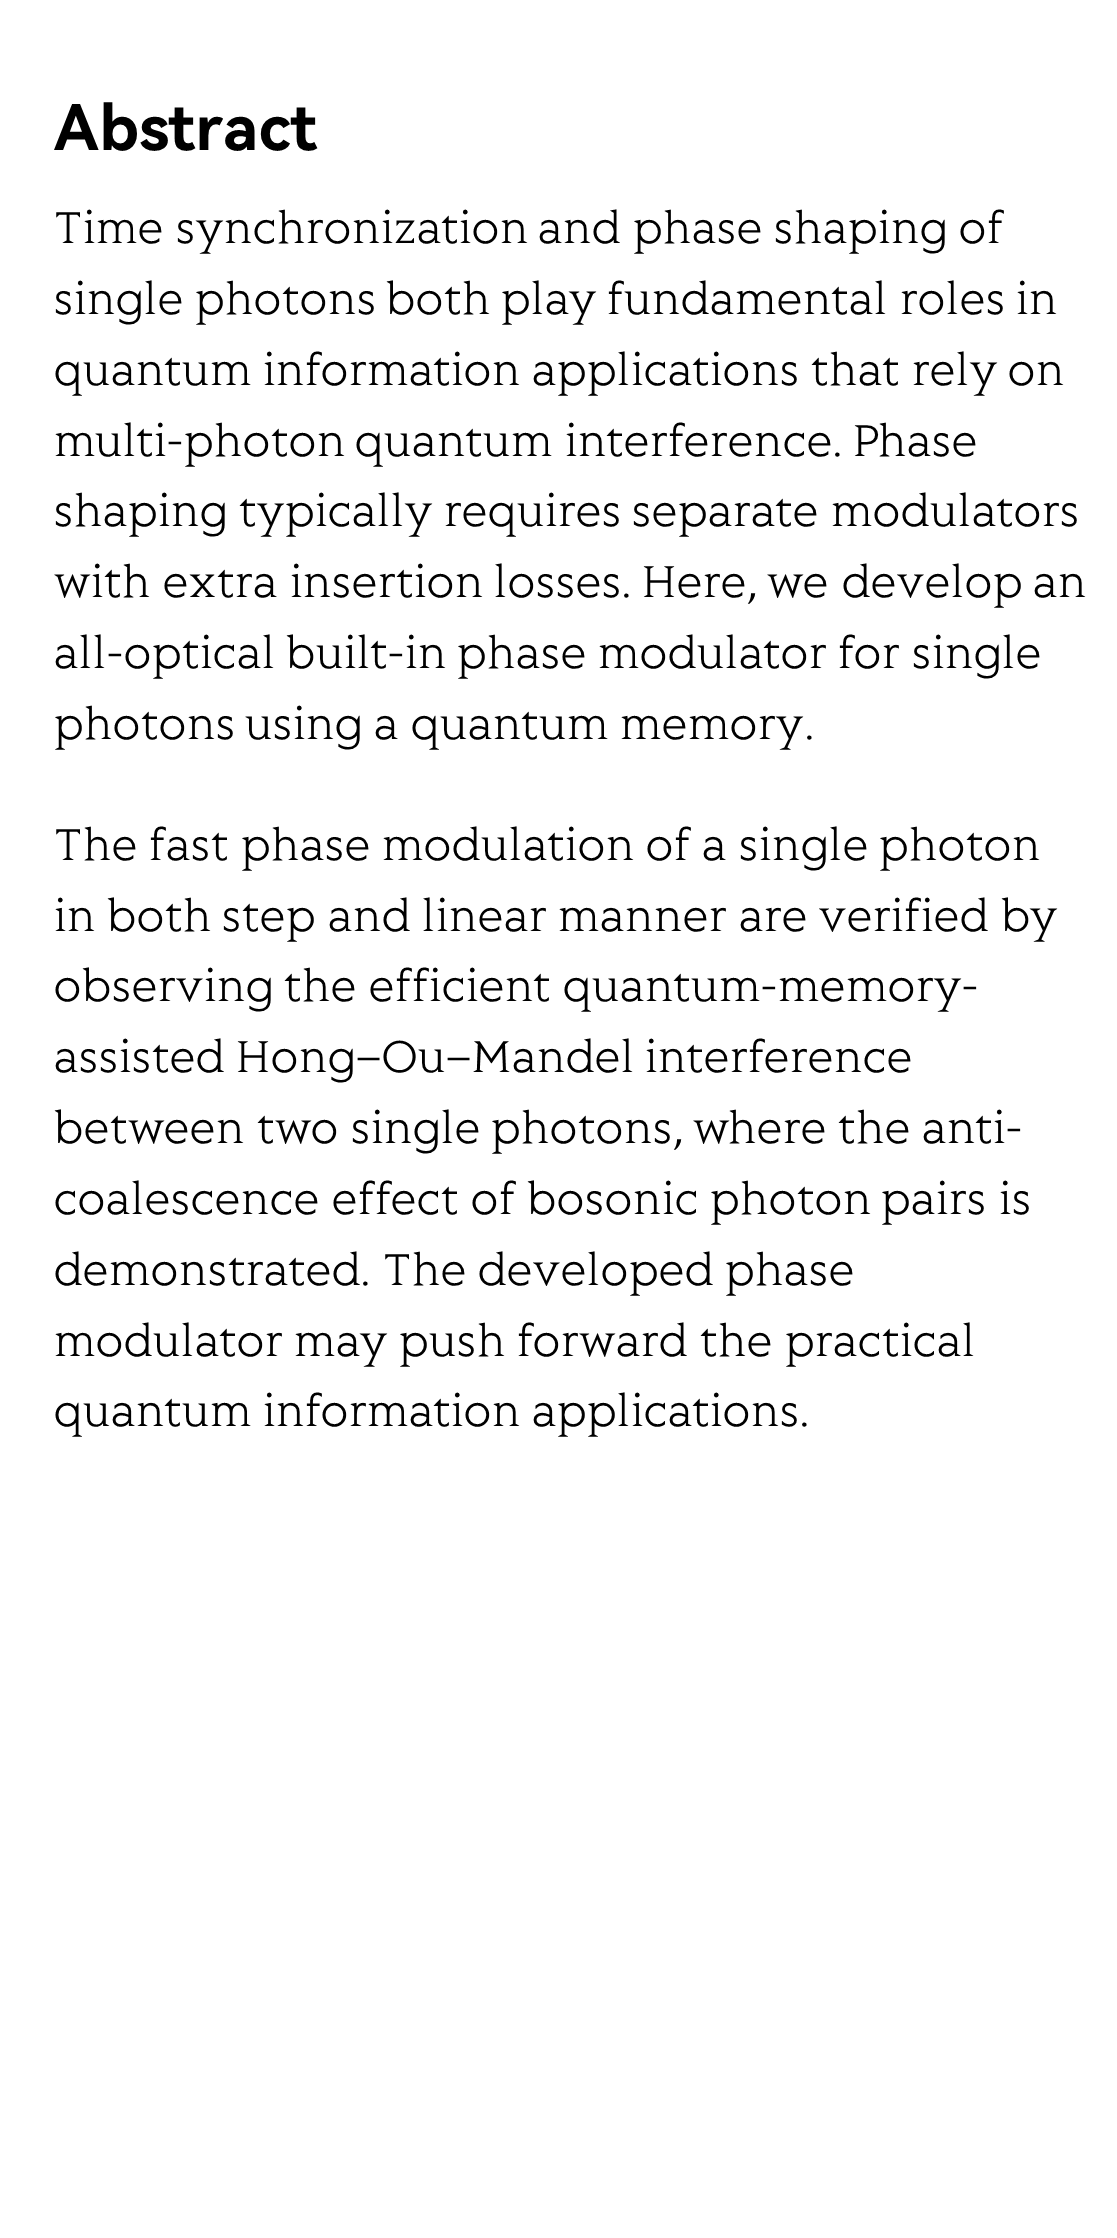 Synchronization and Phase Shaping of Single Photons with High-Efficiency Quantum Memory_2